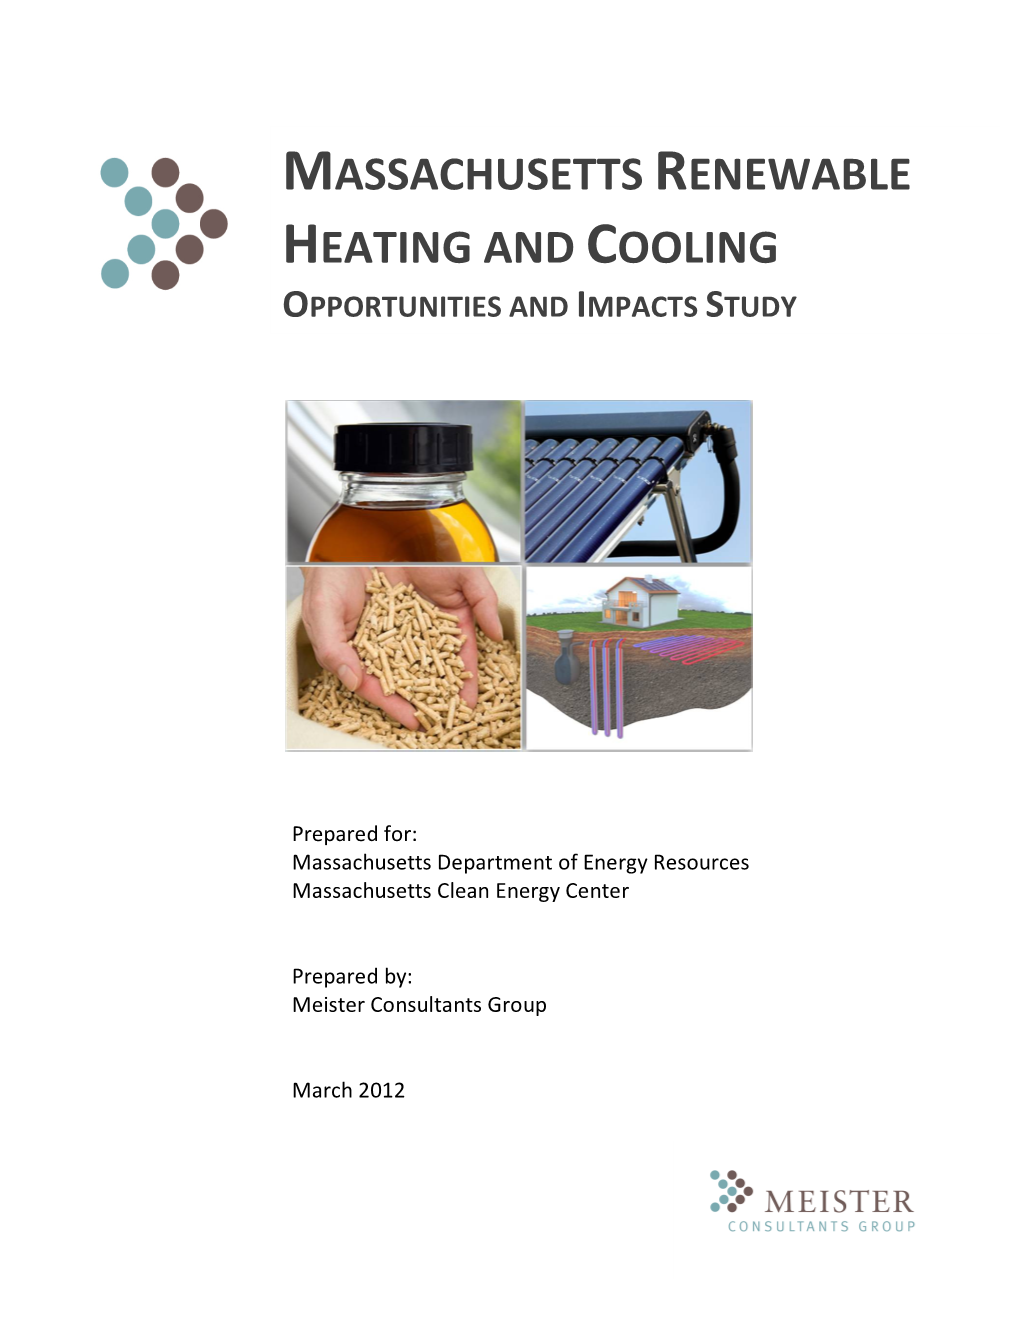 Massachusetts Renewable Heating and Cooling Opportunities and Impacts Study